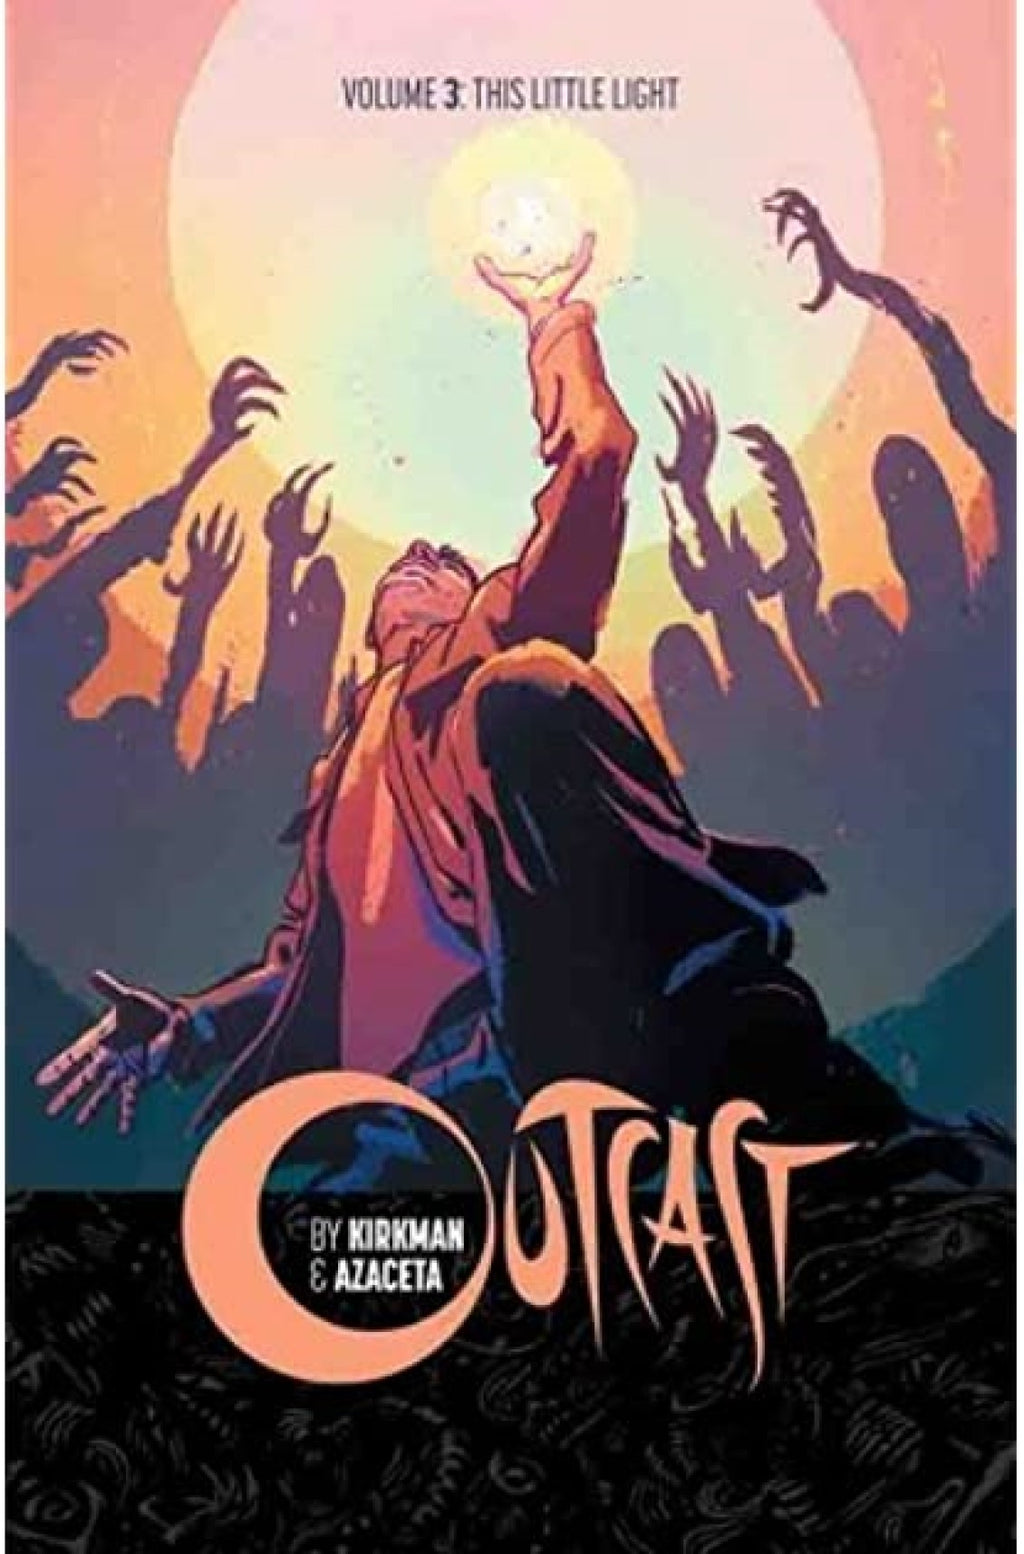 Outcast Volume 3 This Little Light - The Comic Warehouse